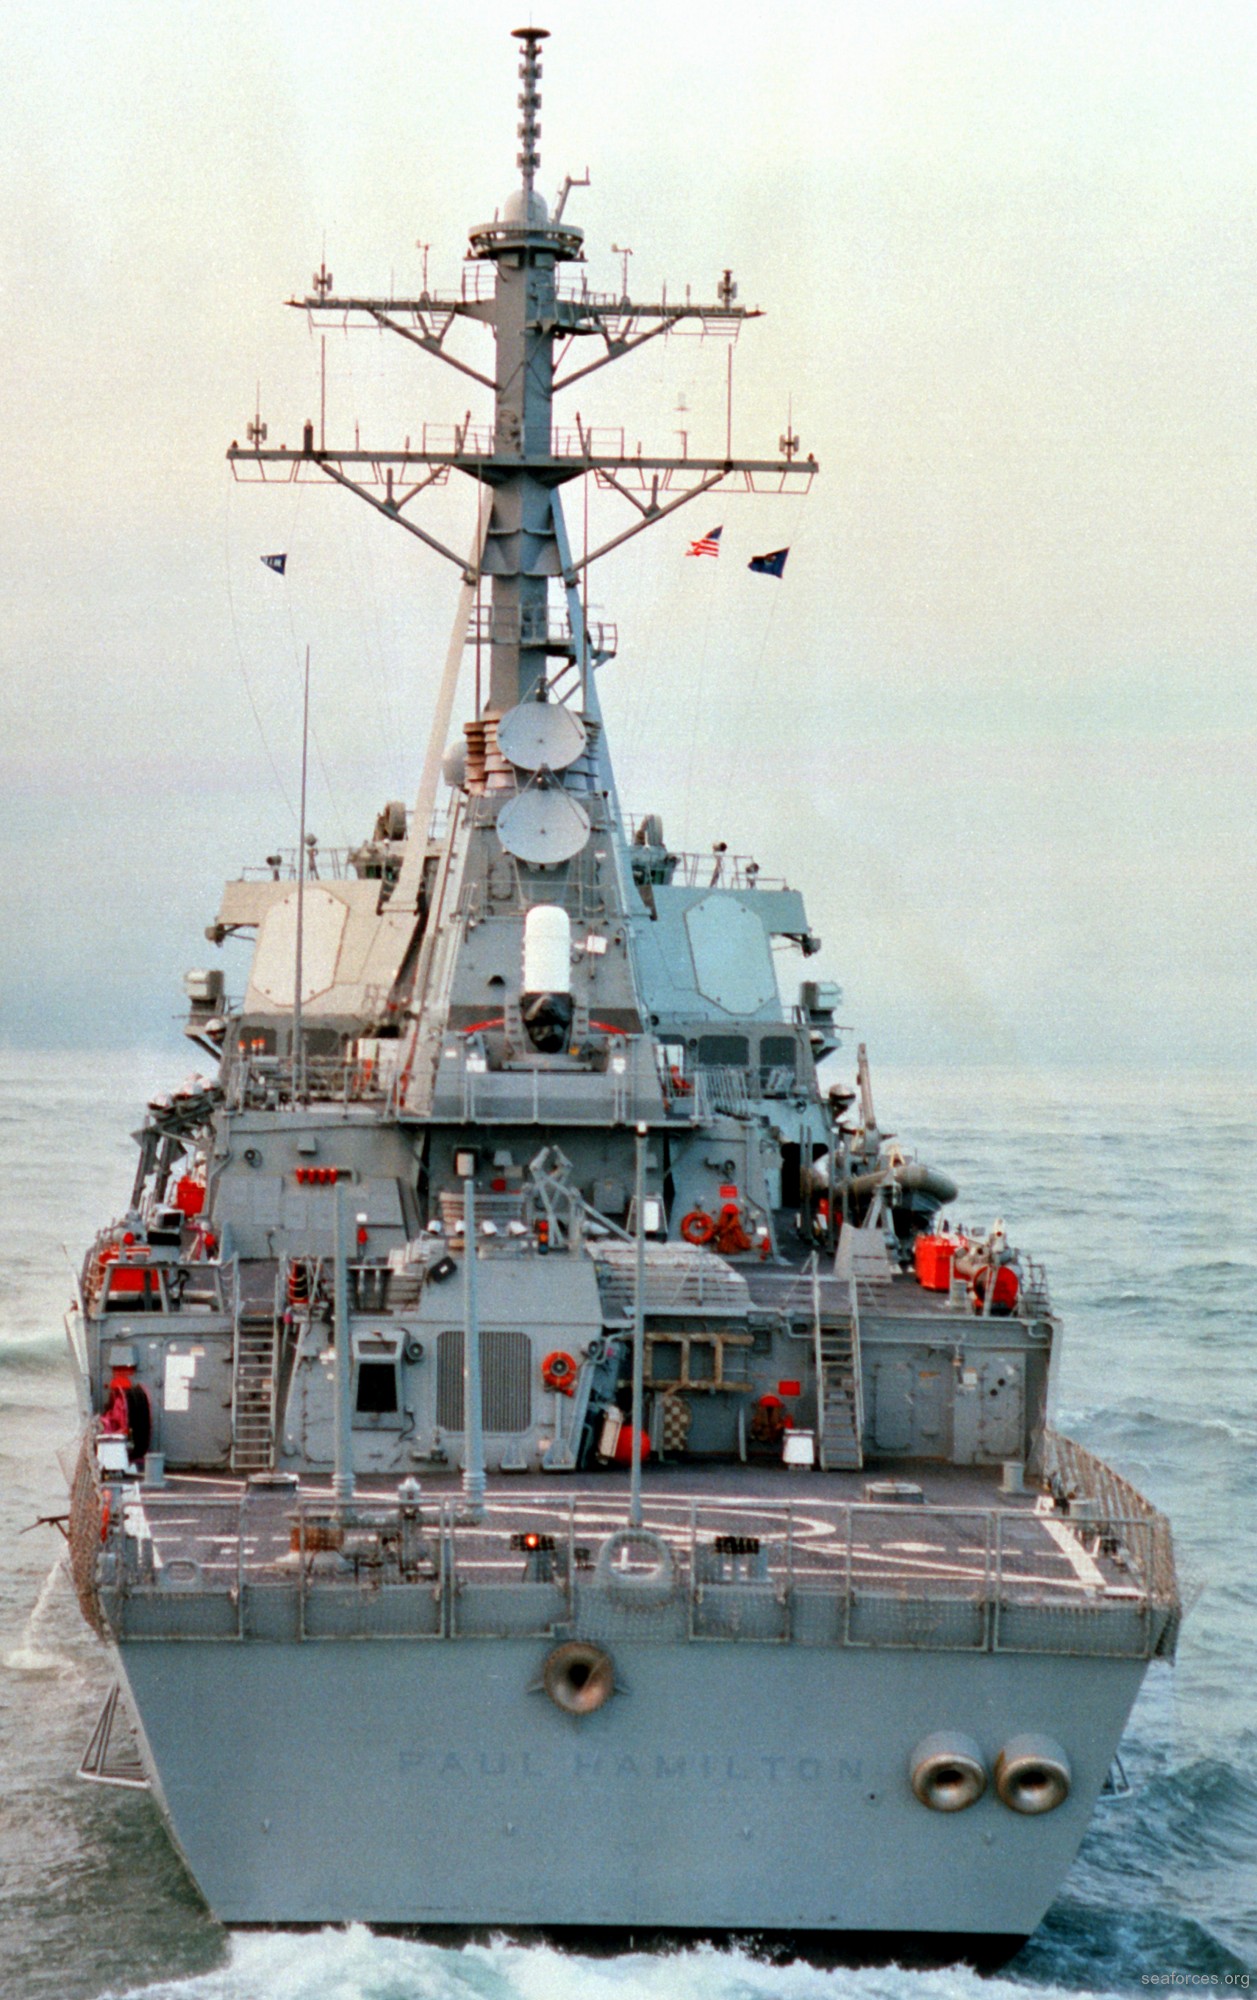 ddg-60 uss paul hamilton guided missile destroyer us navy 49 sea trials 1994